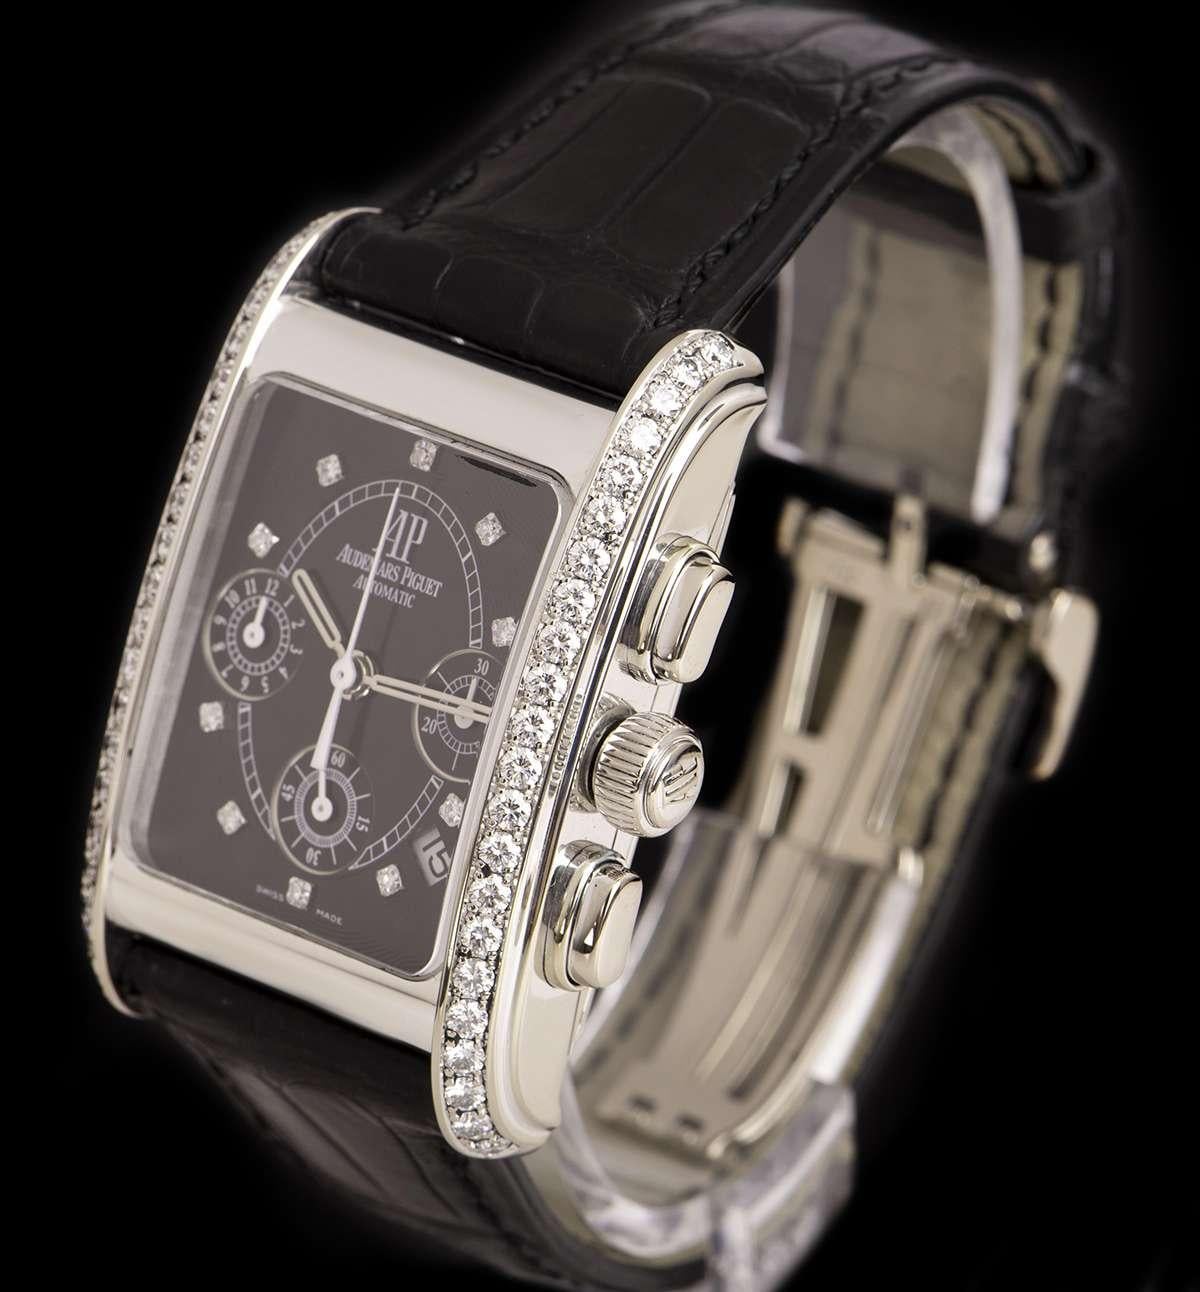 An 18k White Gold Edward Piguet Gents Wristwatch 25946BC.ZZ.D001CR.01, black dial set with 10 applied round brilliant cut diamond hour markers, 30 minute recorder at 3 0'clock, date between 4 and 5 0'clock, small seconds at 6 0'clock, 12 hour